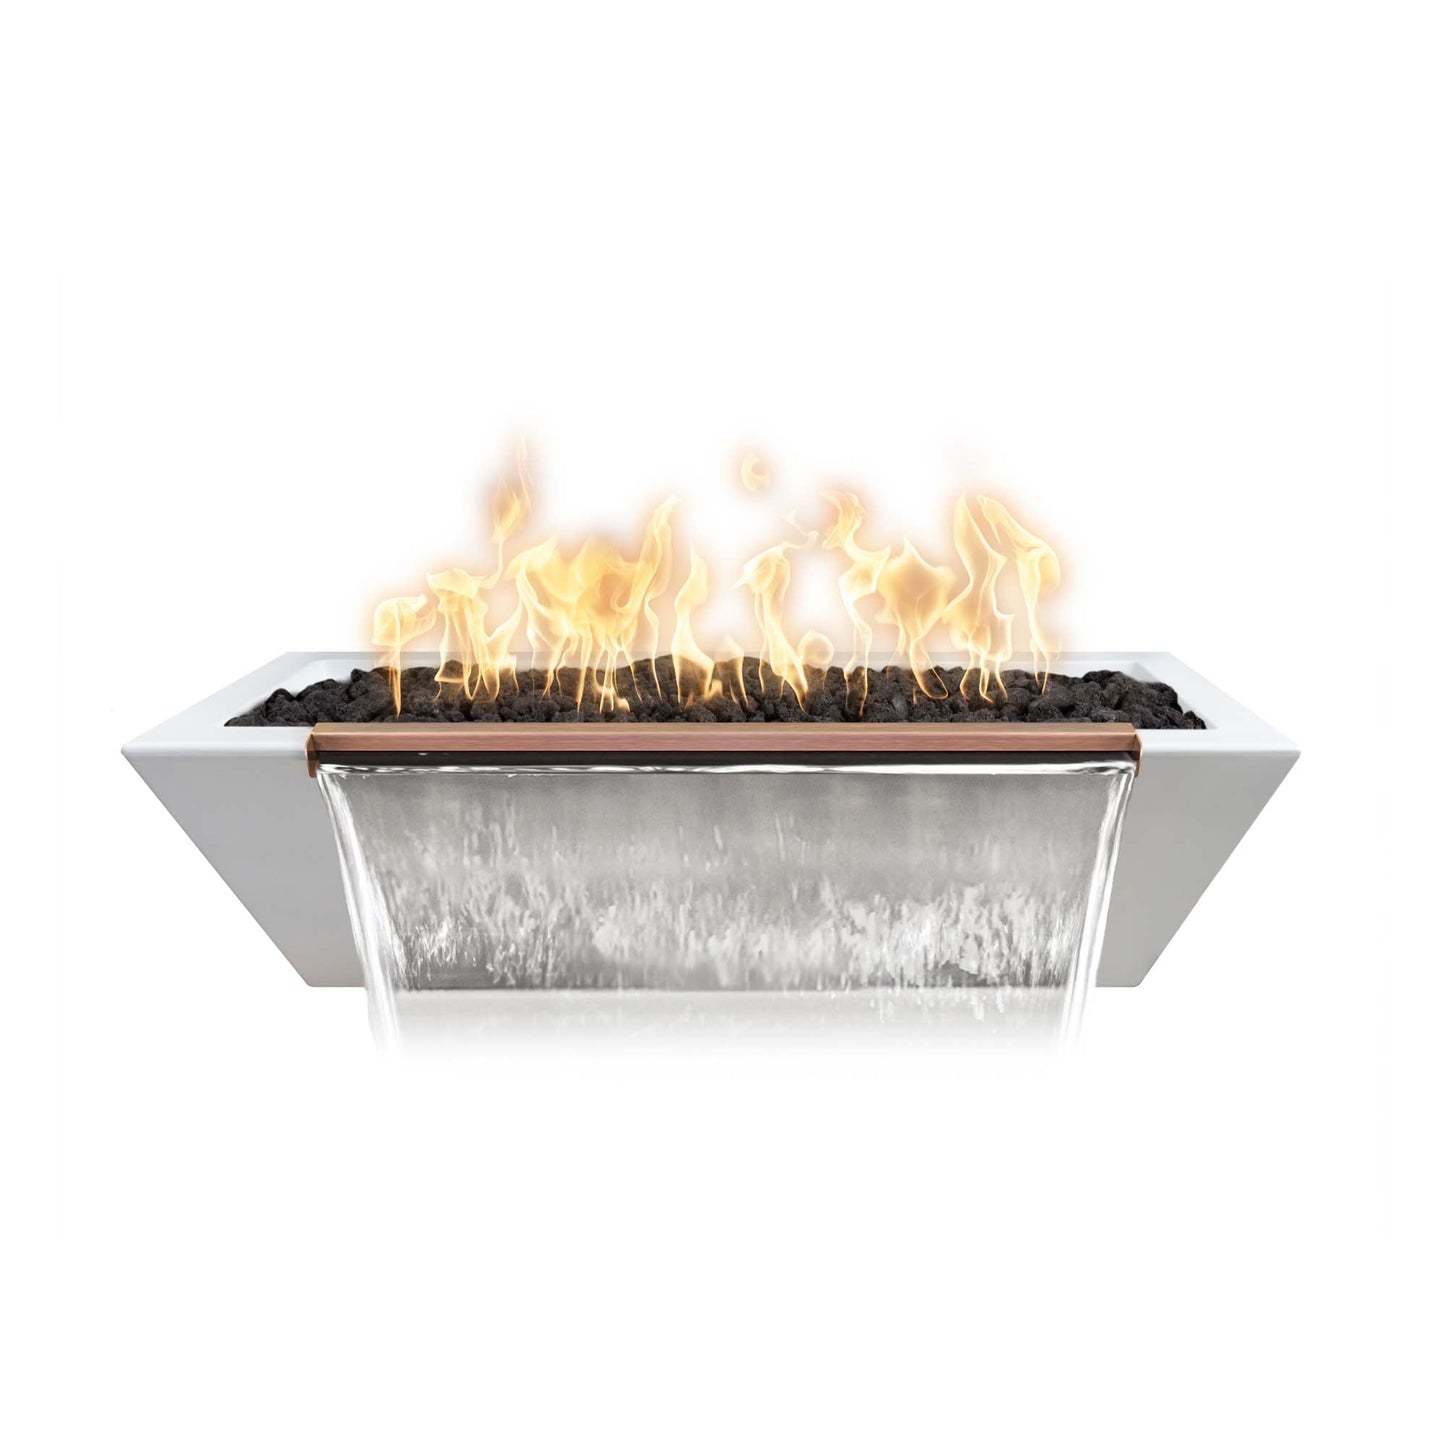 The Outdoor Plus Linear Maya 72" Chestnut GFRC Concrete Liquid Propane Fire & Water Bowl with Match Lit Ignition